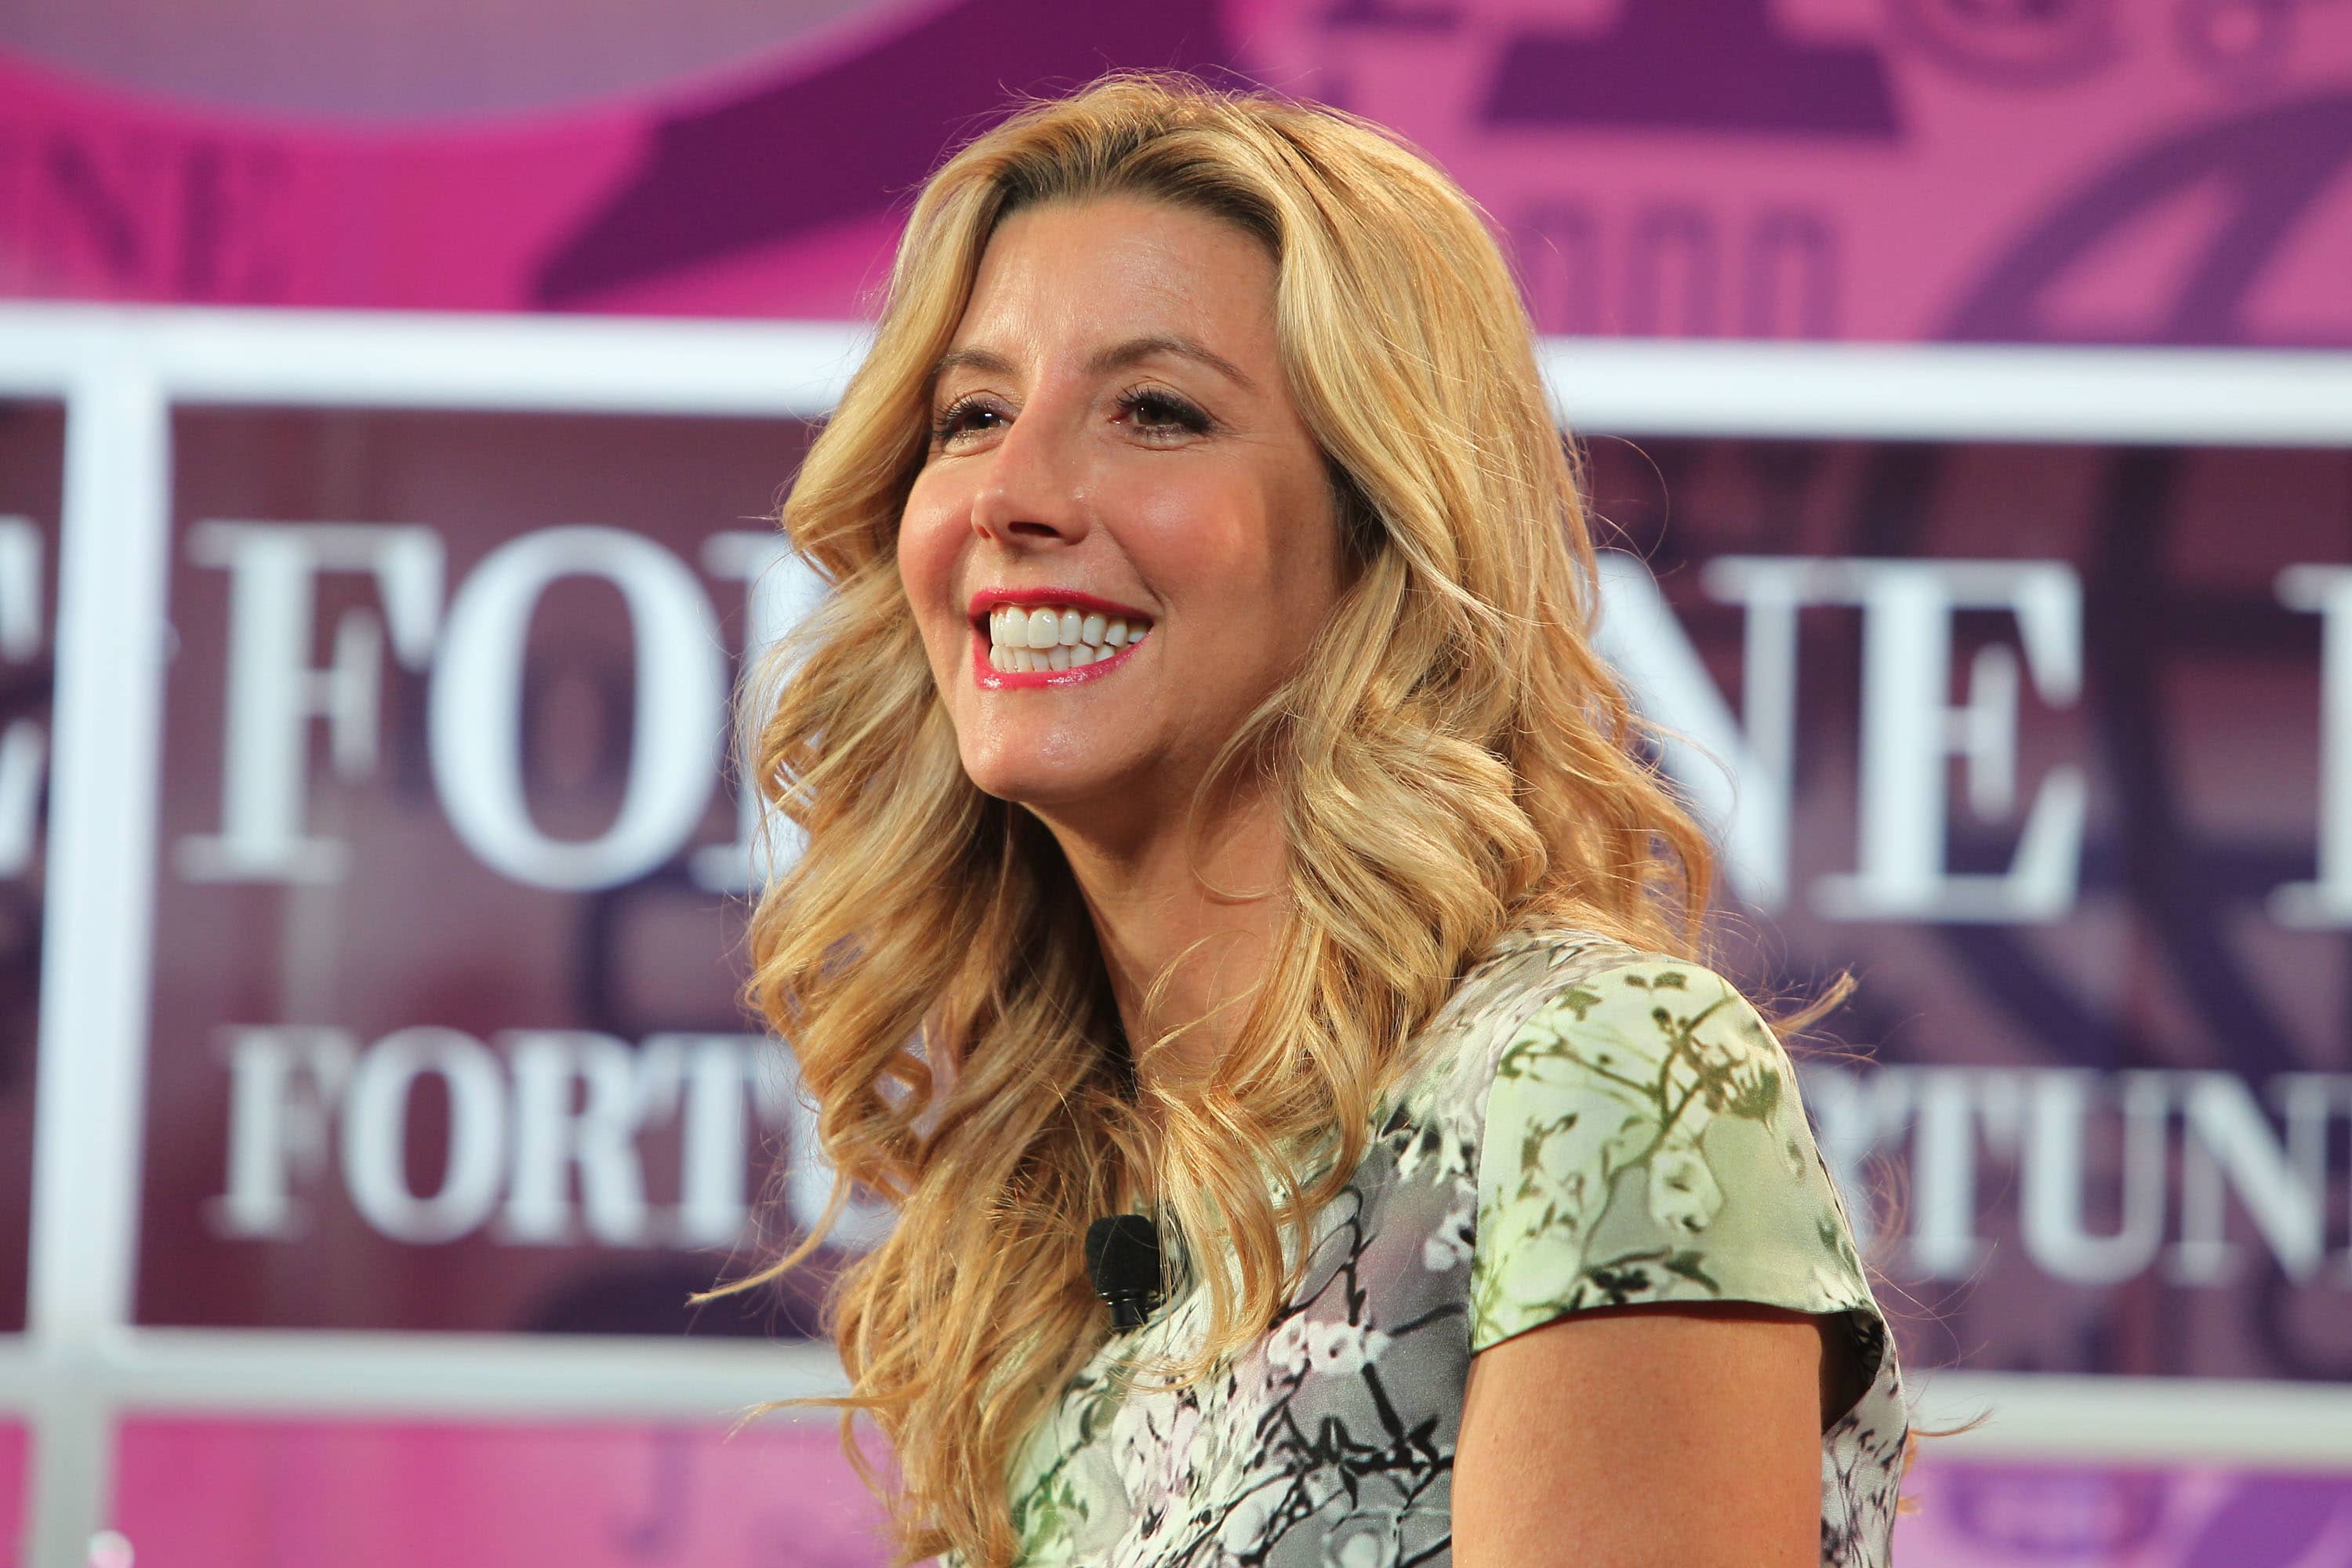 Spanx founder Sara Blakely’s mother on raising a successful CEO